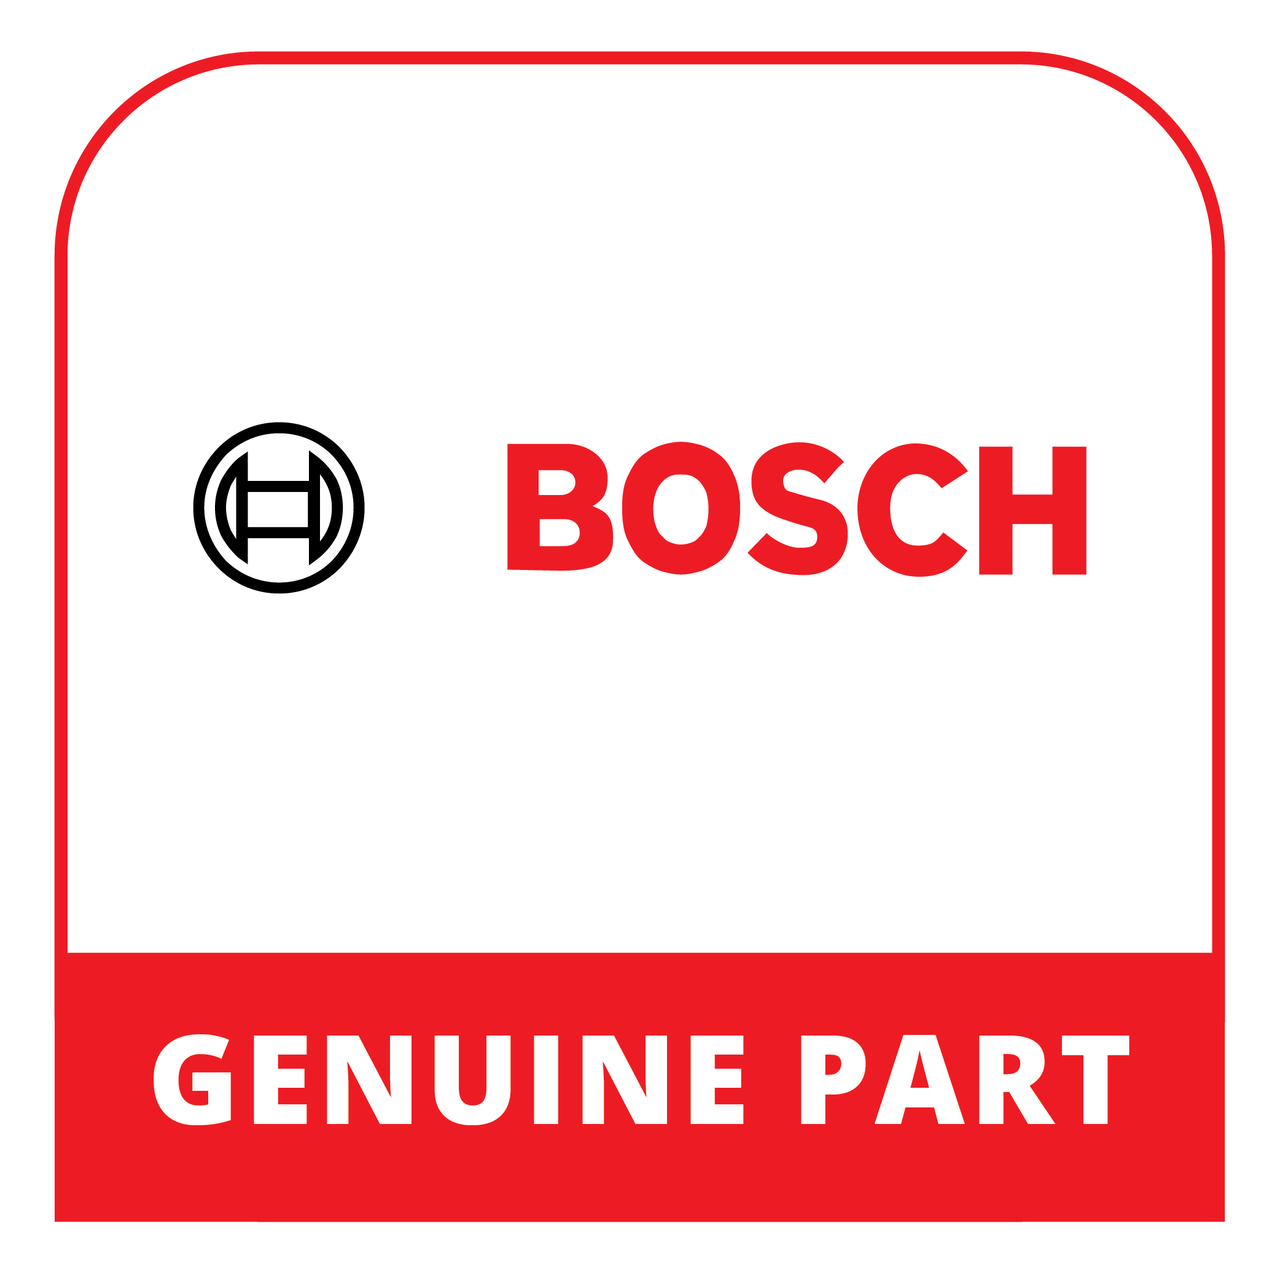 Bosch (Thermador) 12041444 - Power Module Programmed - Genuine Bosch (Thermador) Part